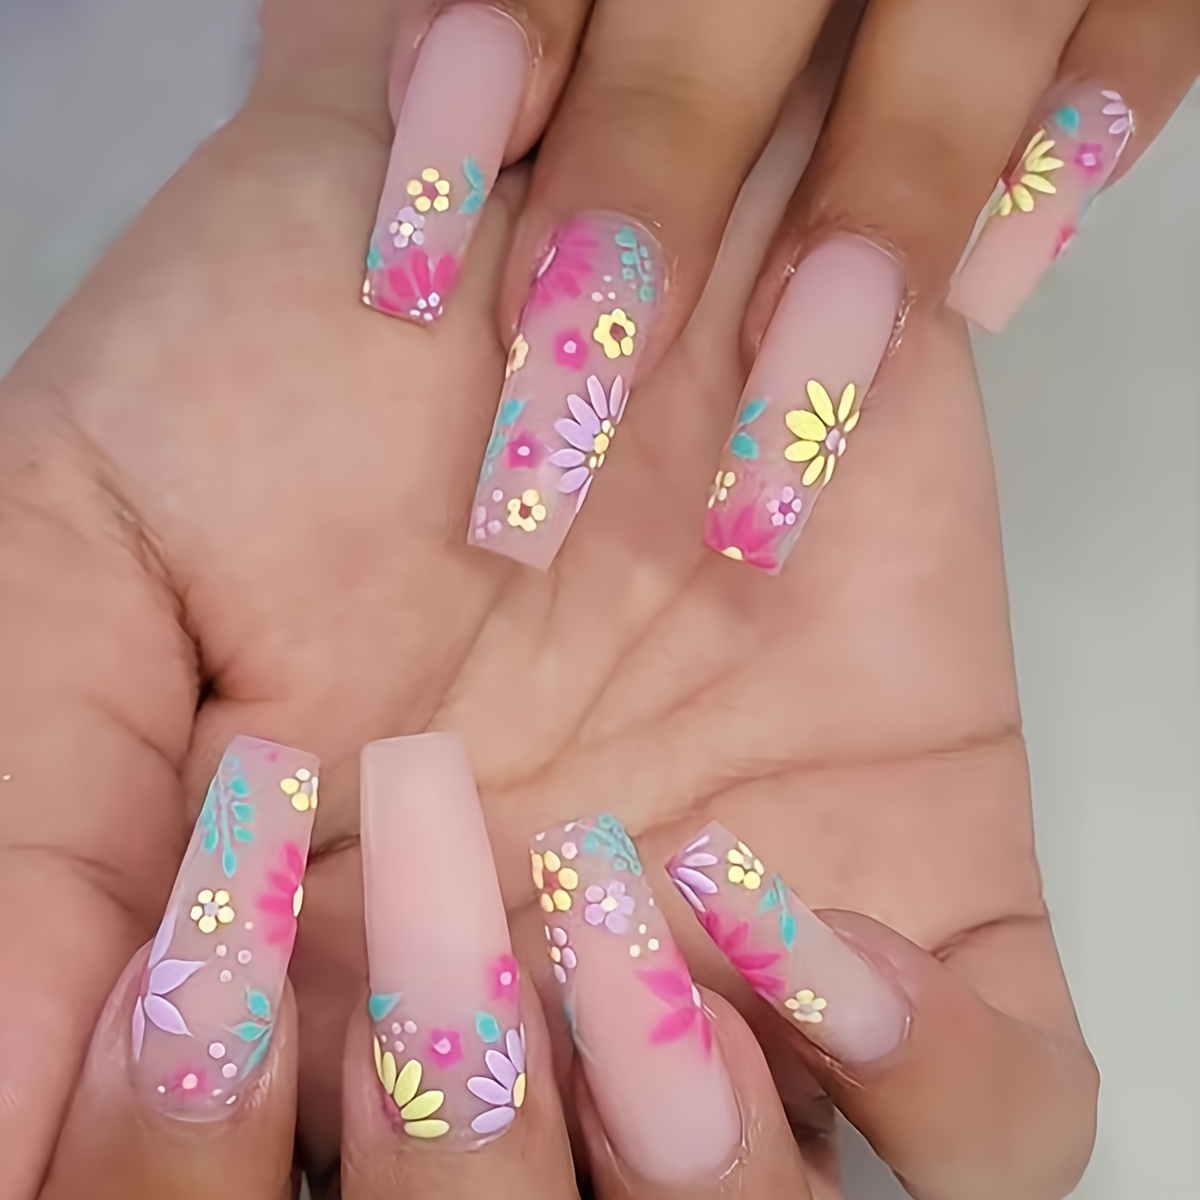 Pink and white airbrush nails with 3d flowers, Anna Nails